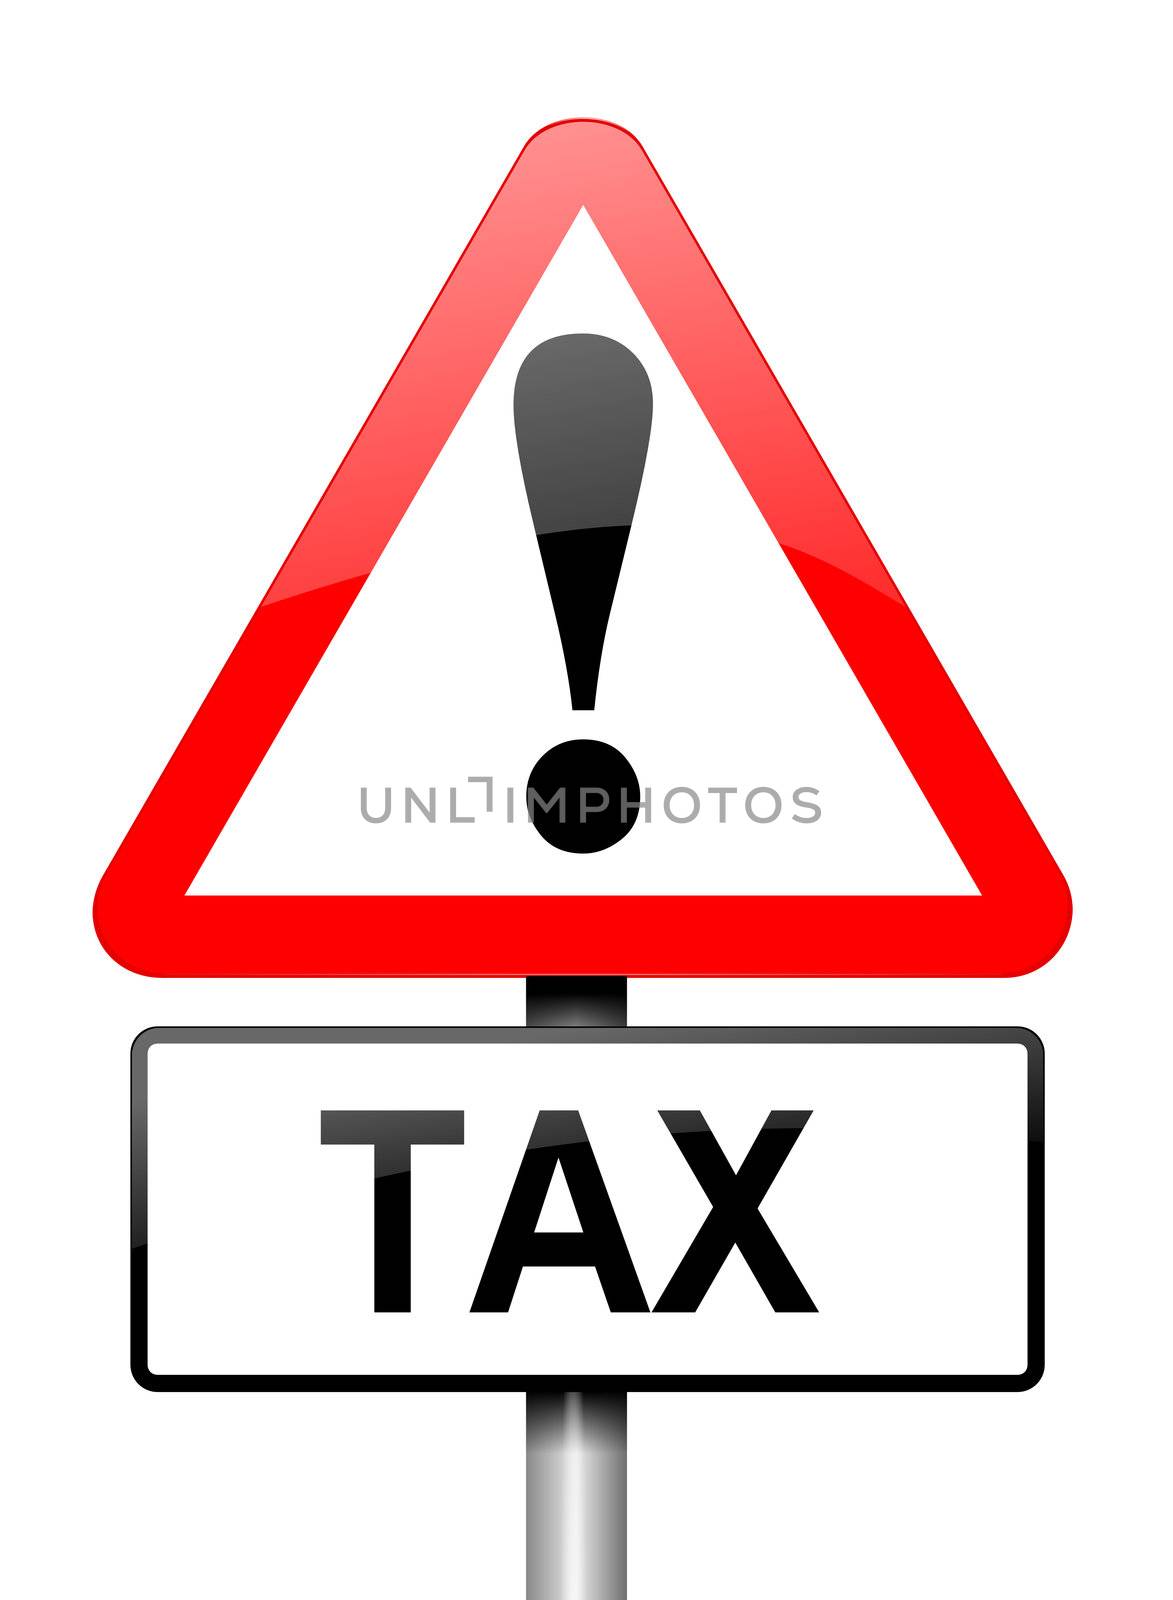 Illustration depicting a red and white triangular warning sign with a tax concept. White background.